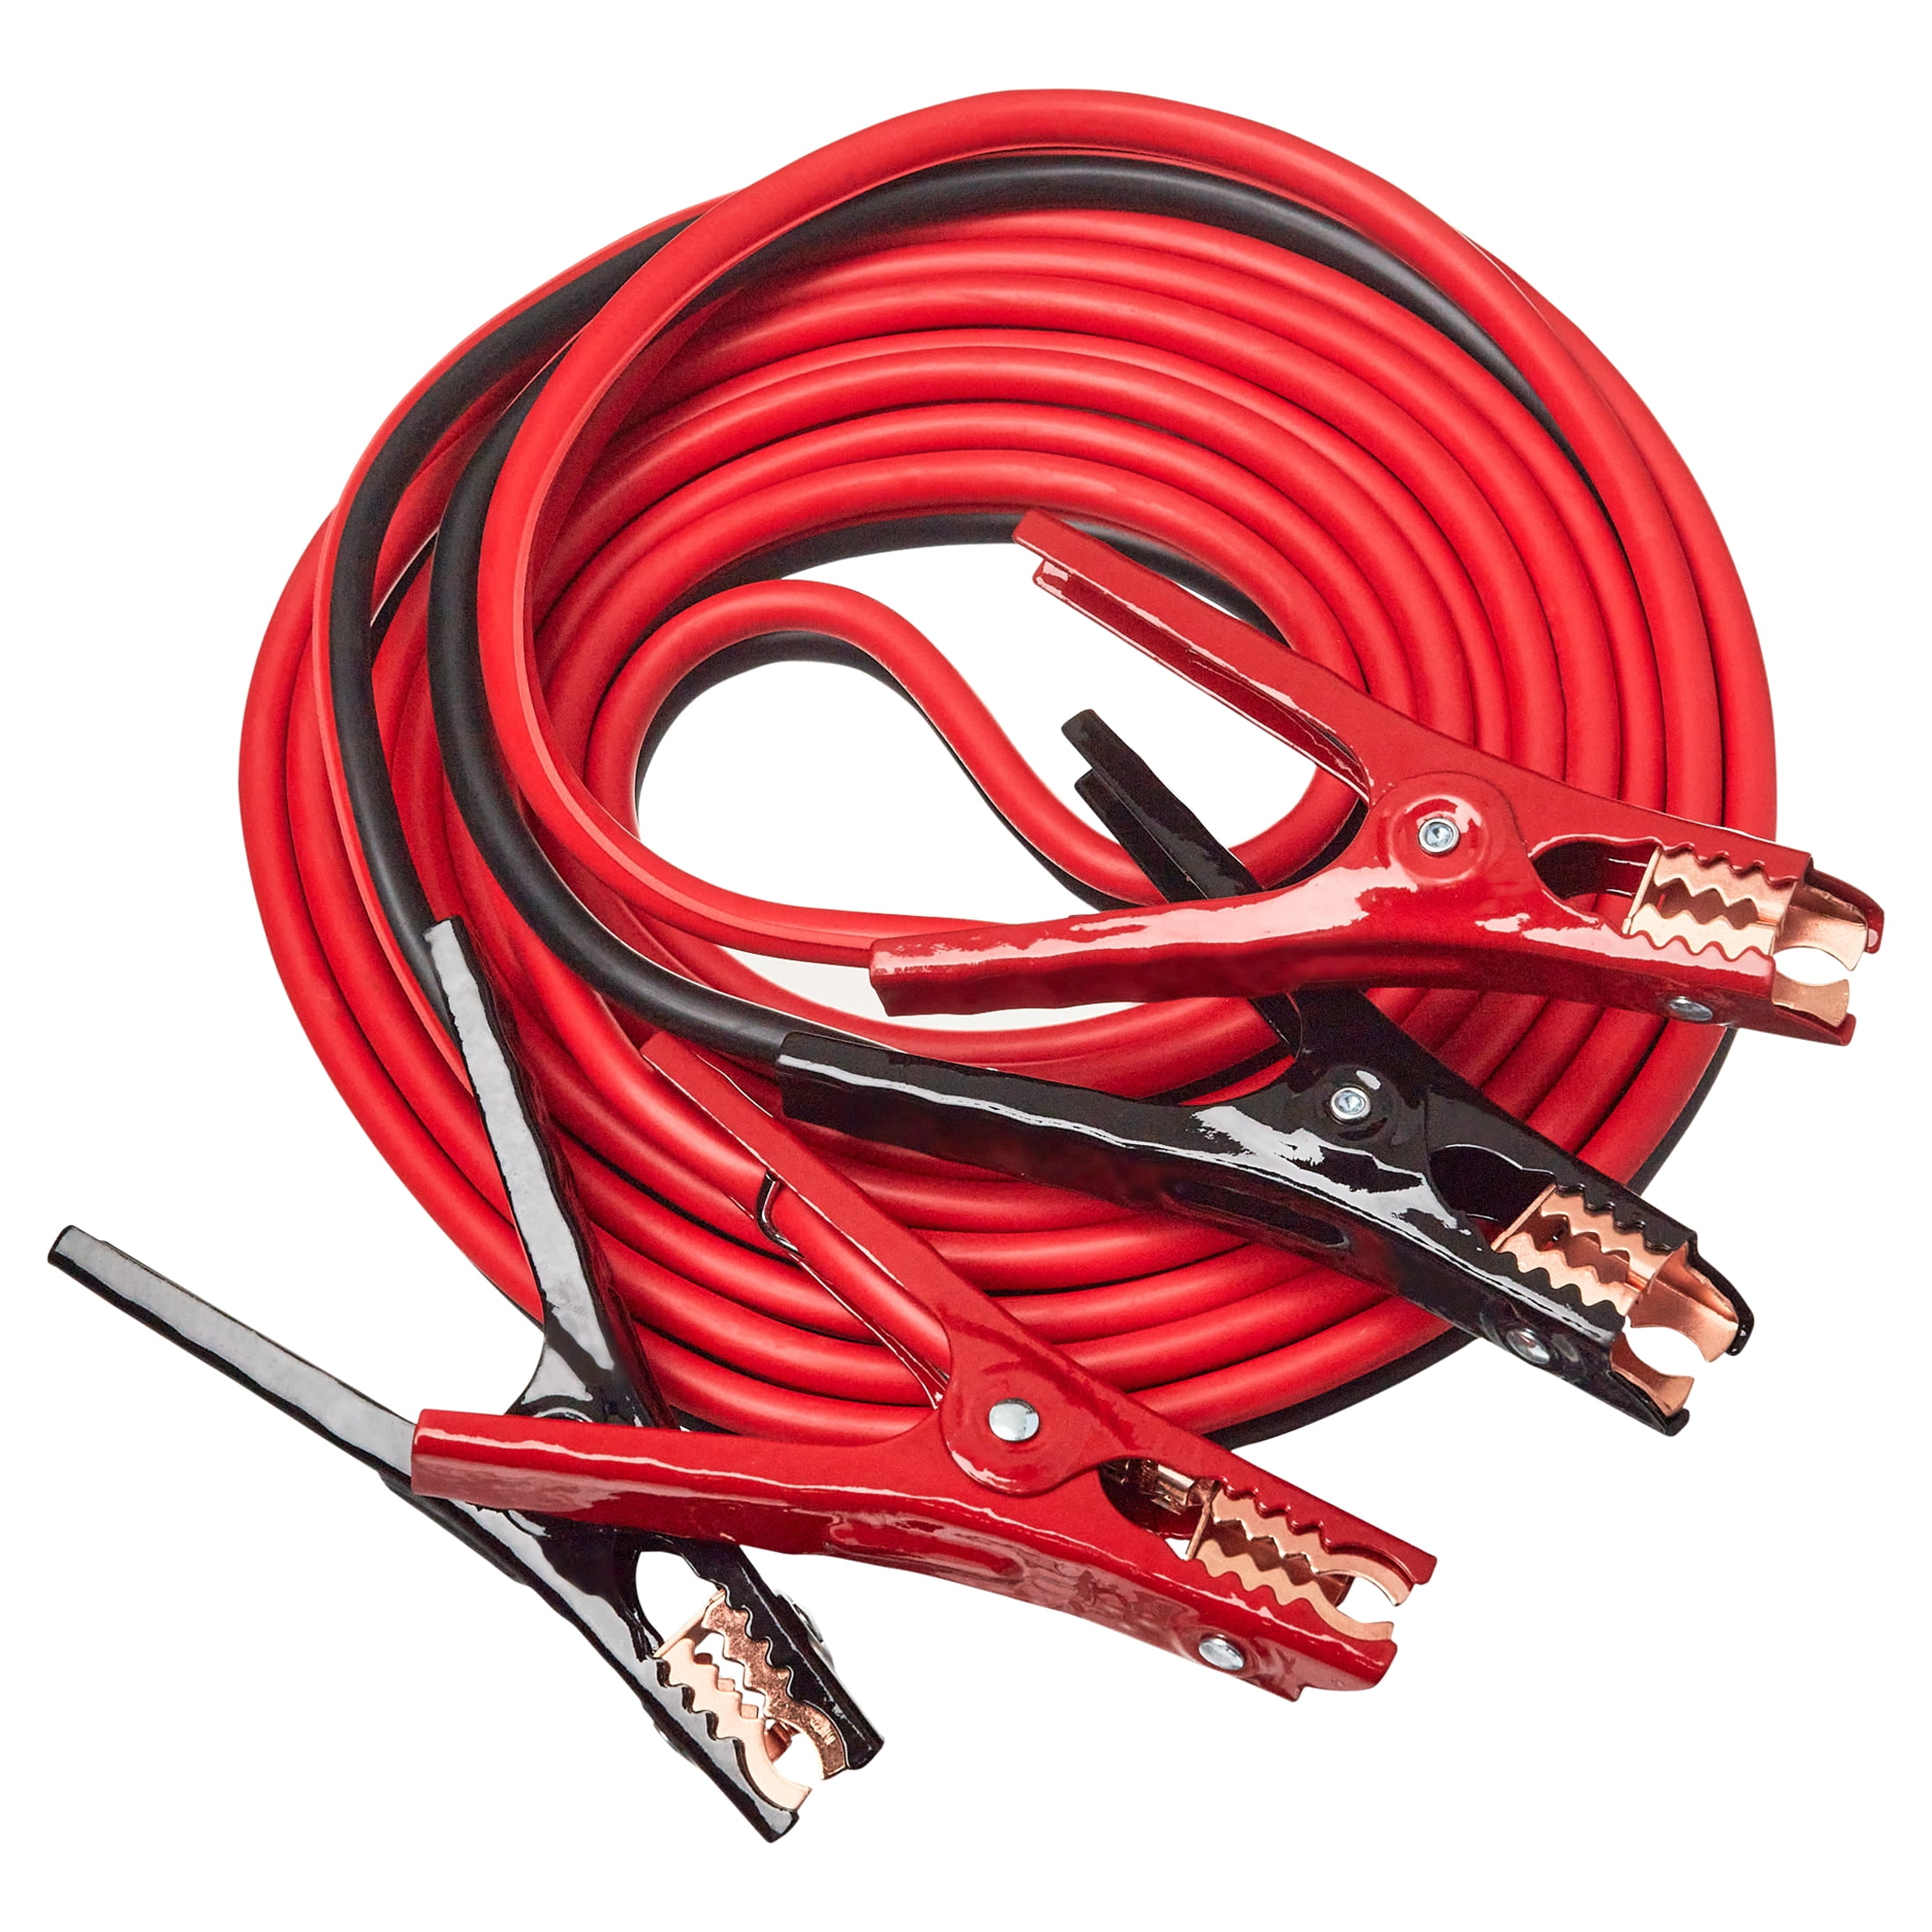 Duralast Gold 20ft Battery Jumper Cables